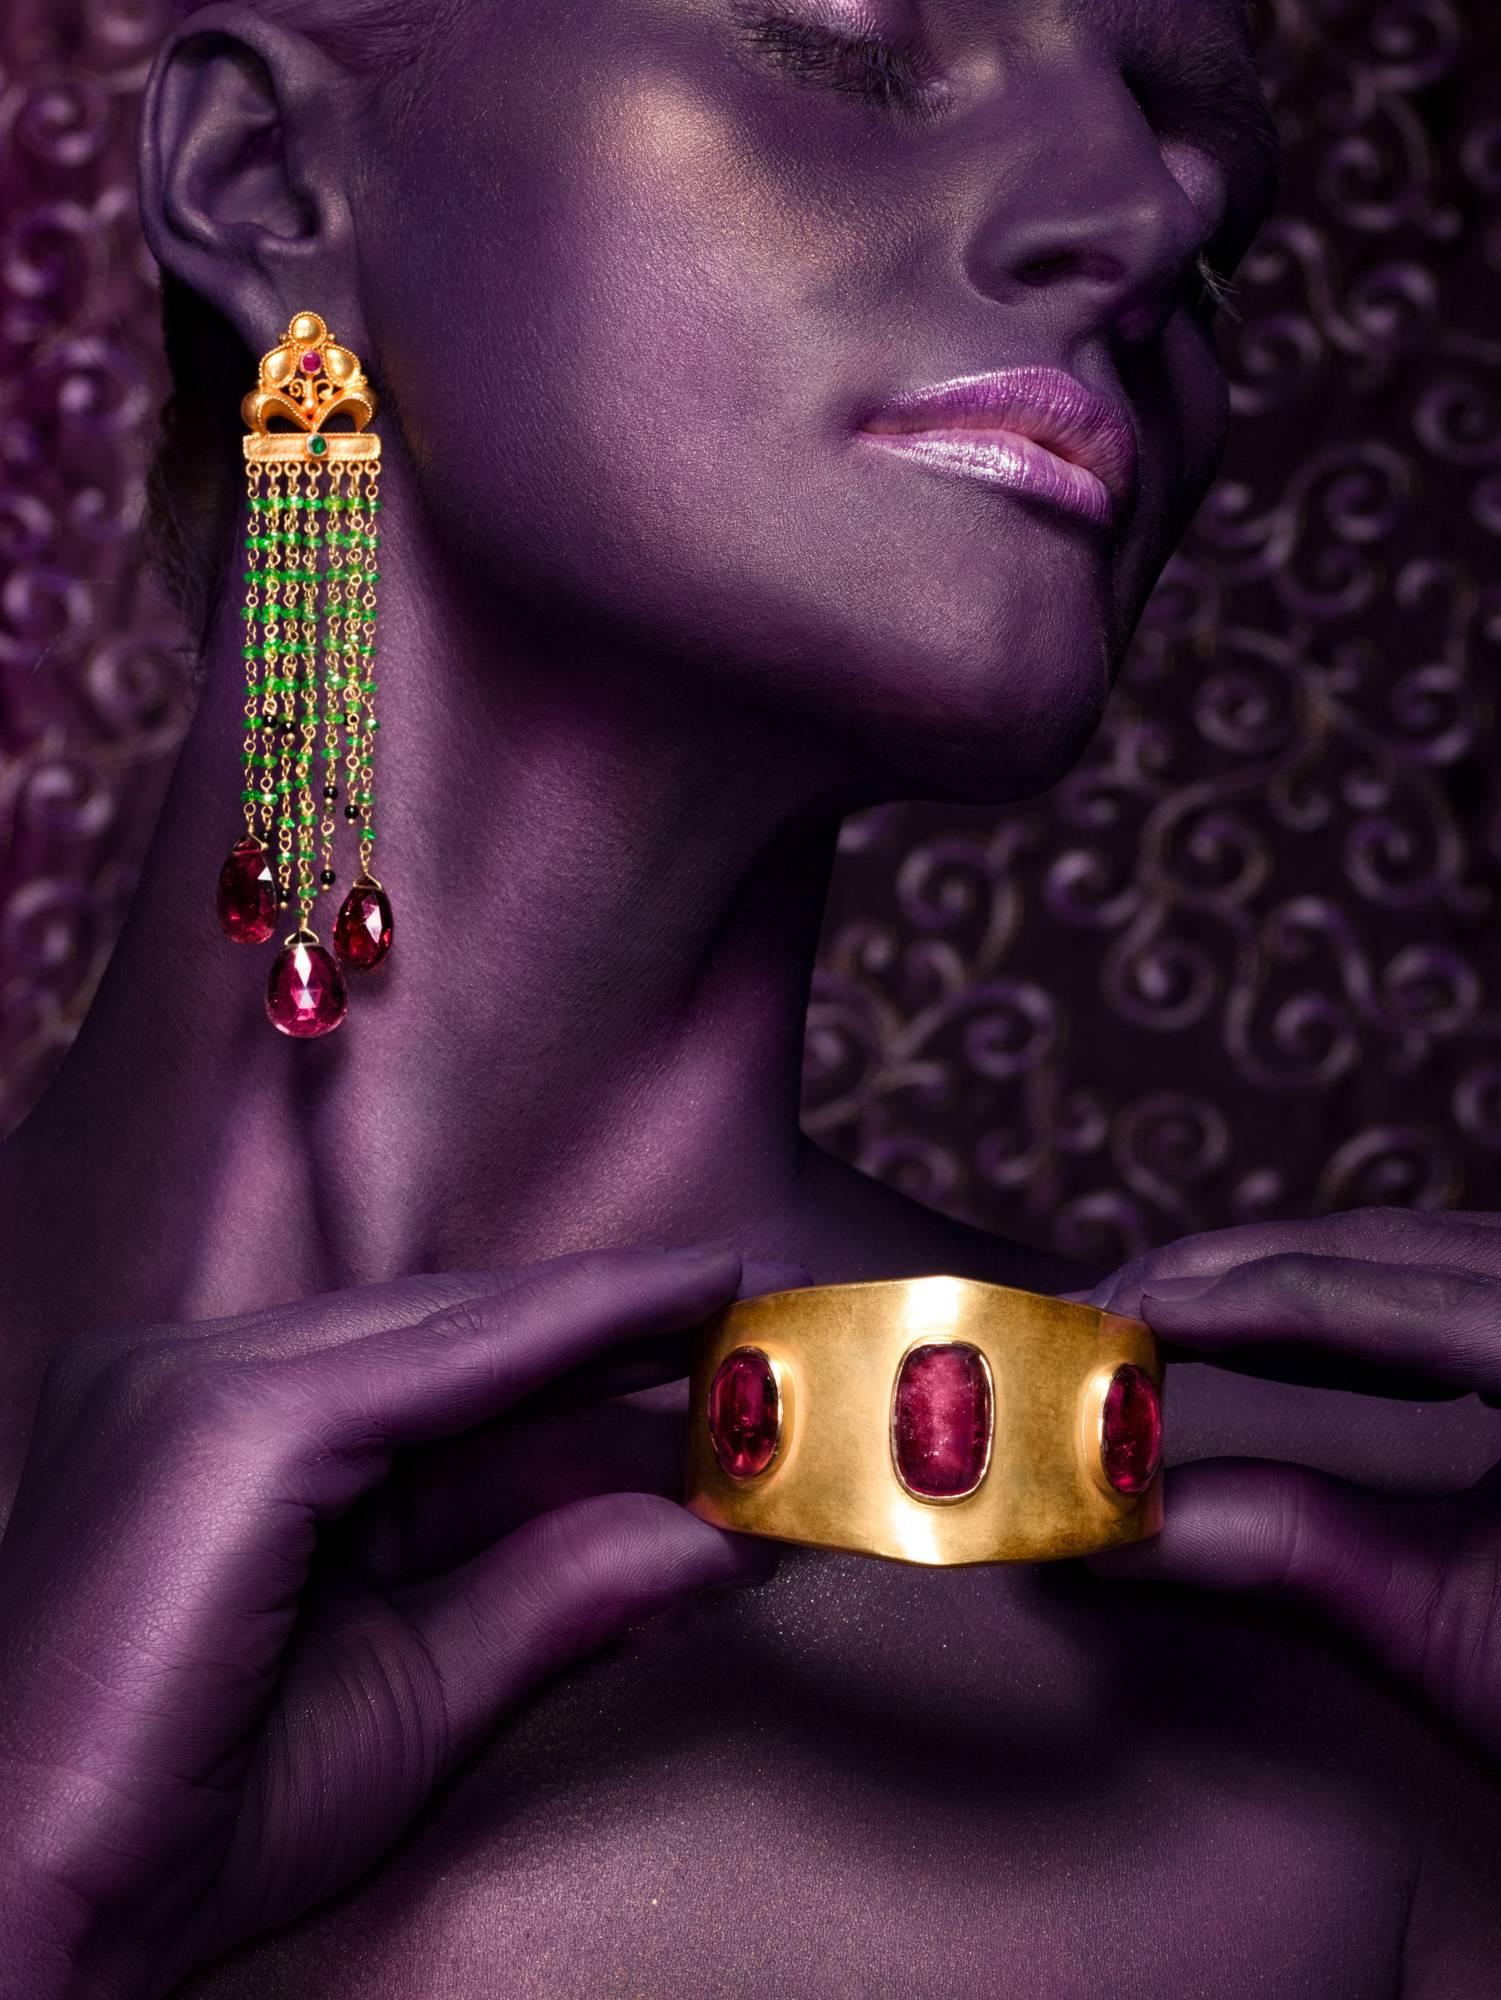 A pair of spectacular and unique, hand crafted 18 karat gold precious stone earrings. Dark red Tourmaline drops are suspended by vibrant green tsavorite beads. Small onyx beads are playfully dispersed among the tsavorite which are held by an 18